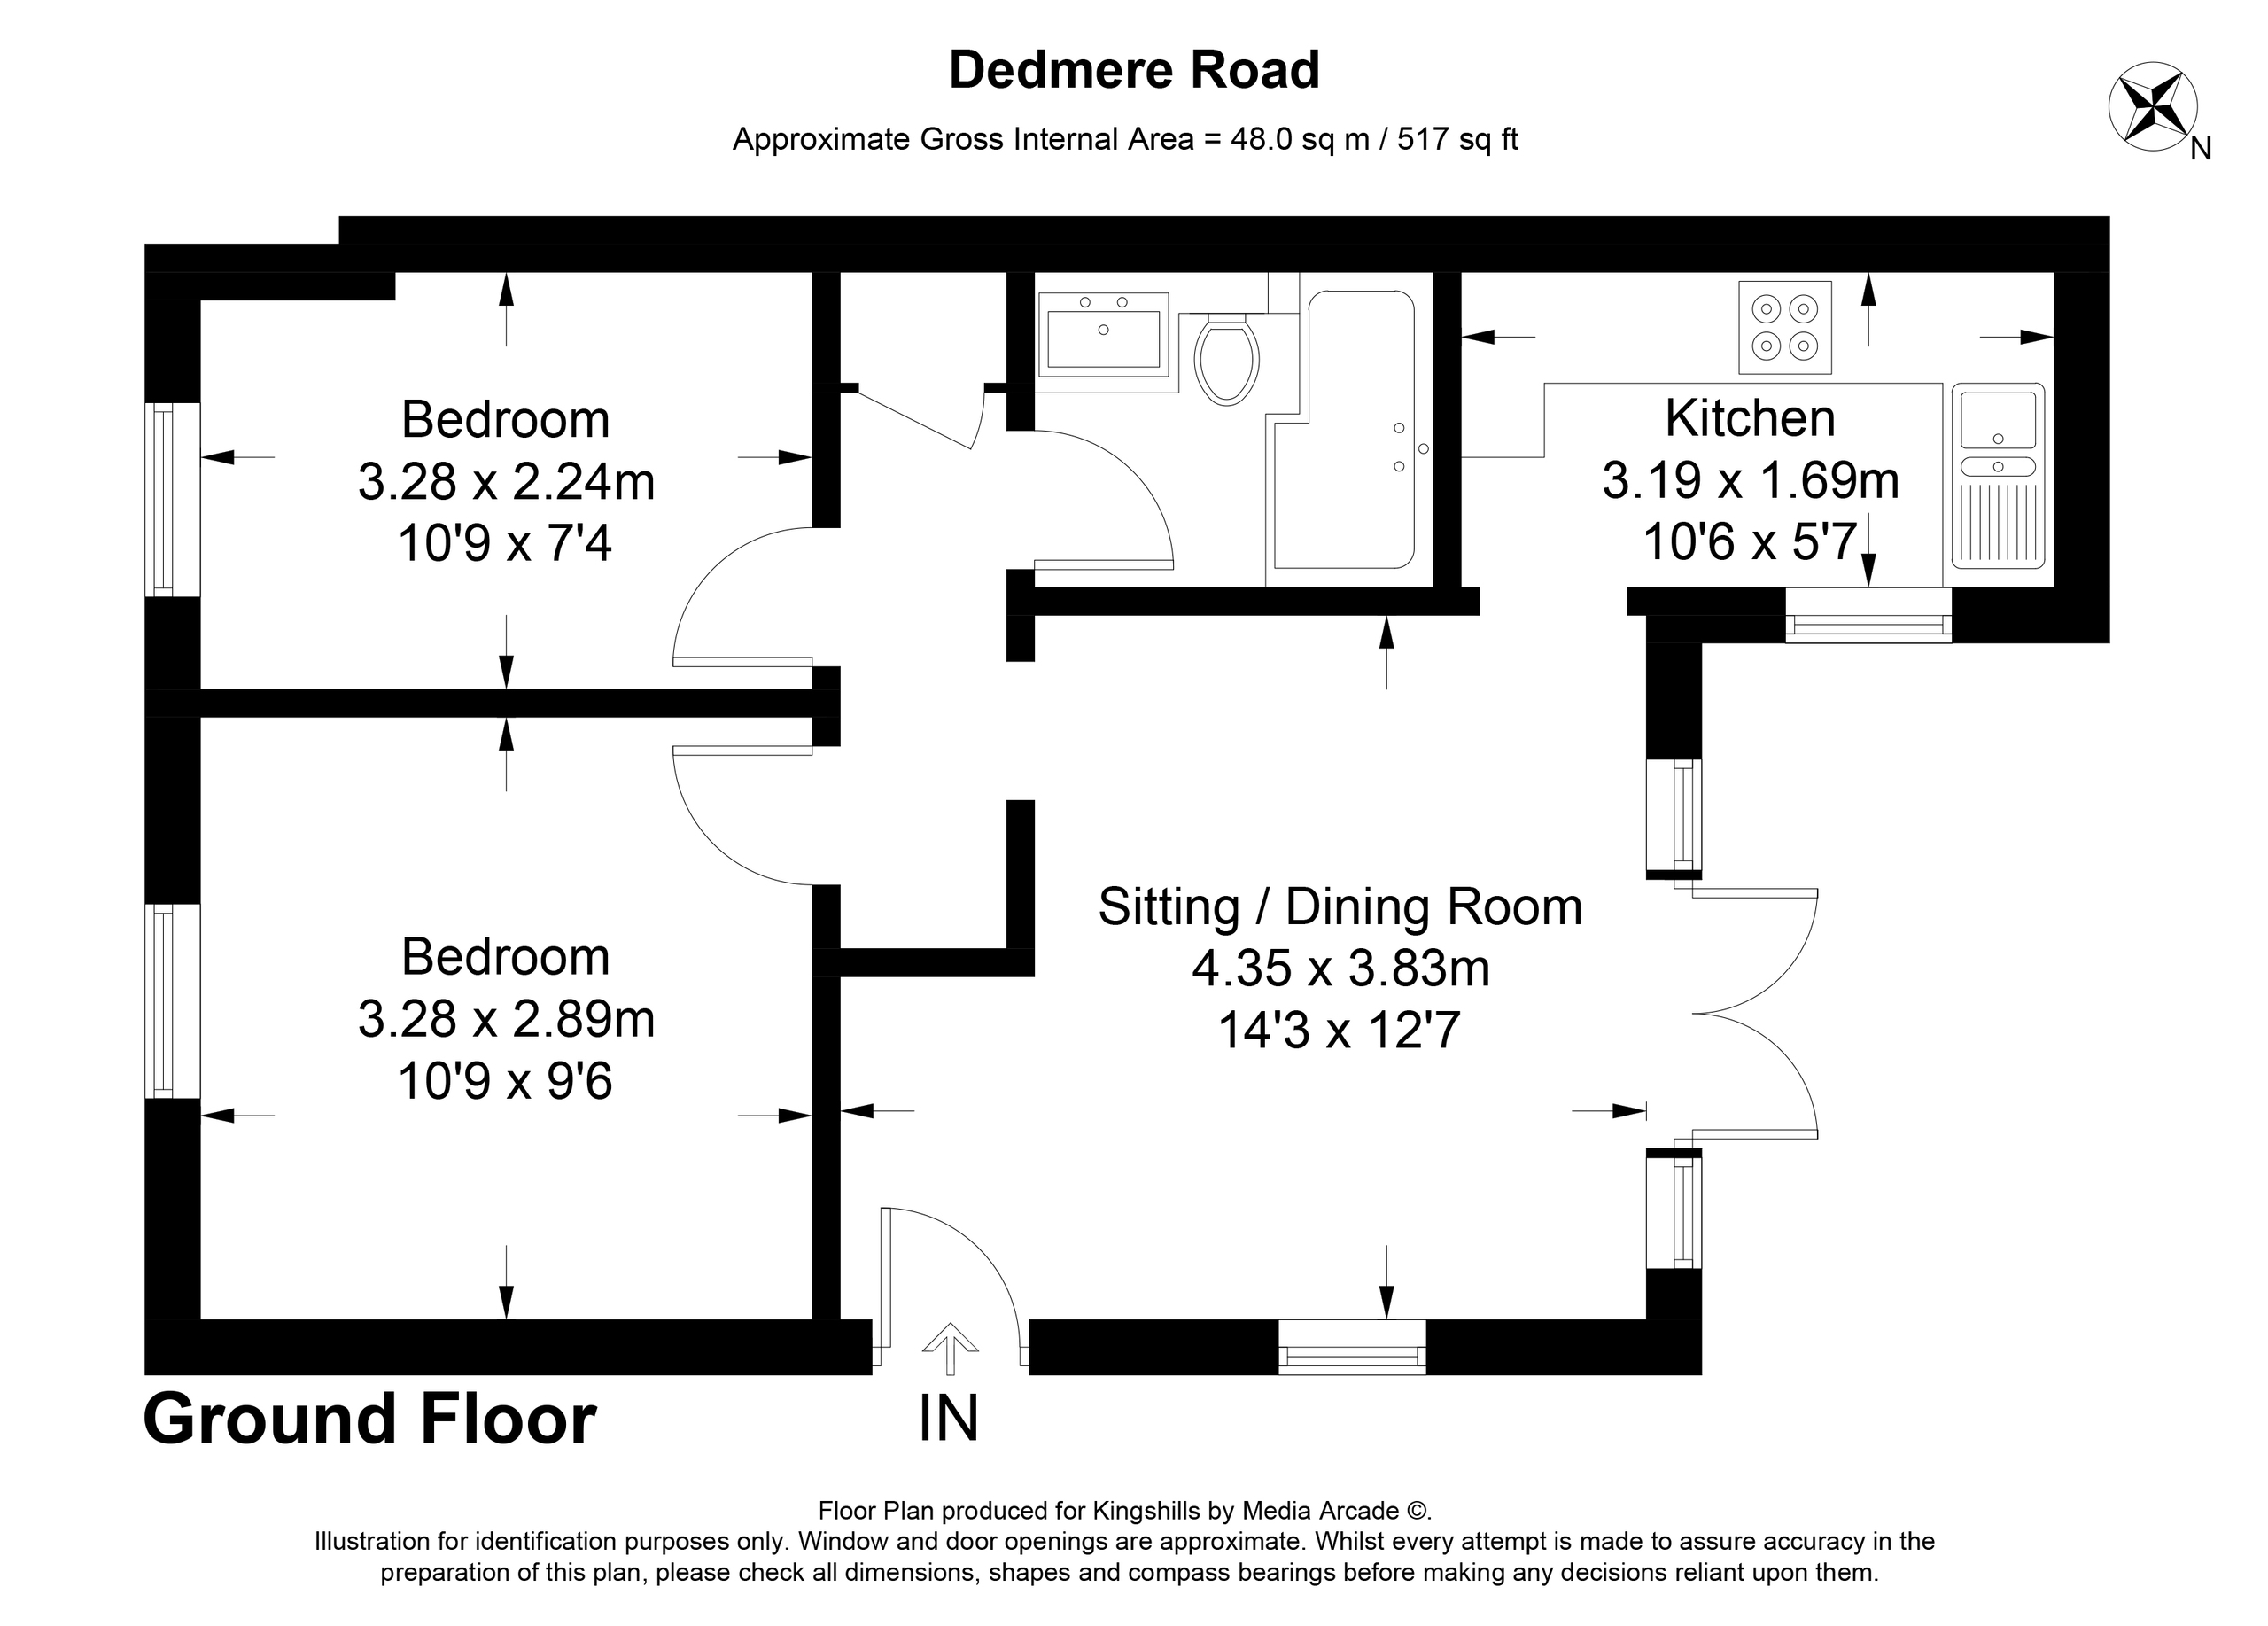 2 bed apartment for sale in Dedmere Road, Marlow - Property floorplan